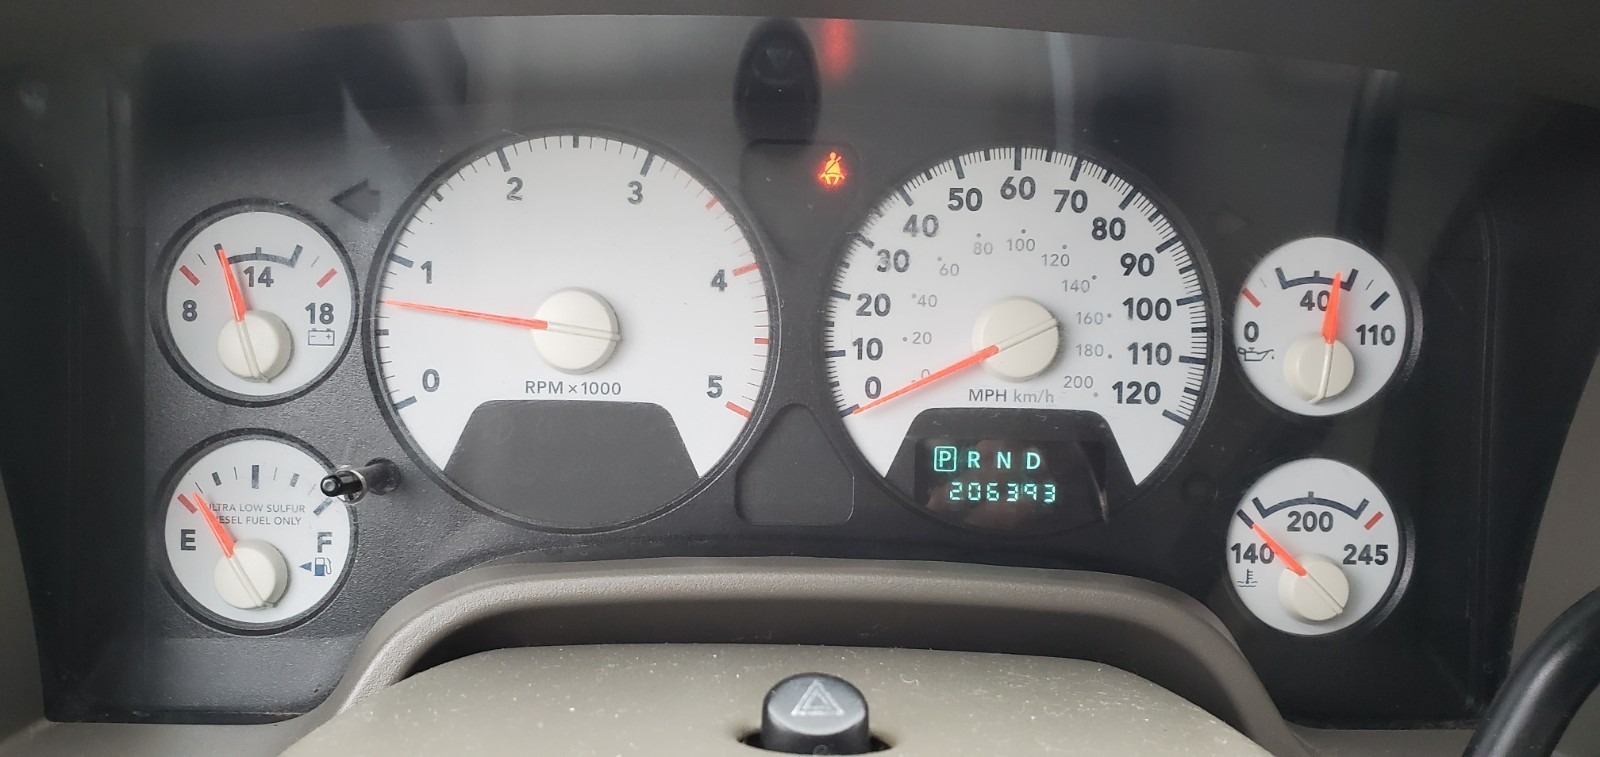 11 2011 Dodge Ram 1500 Speedometer Cluster mph w//Vehicle Info Without Long Horn